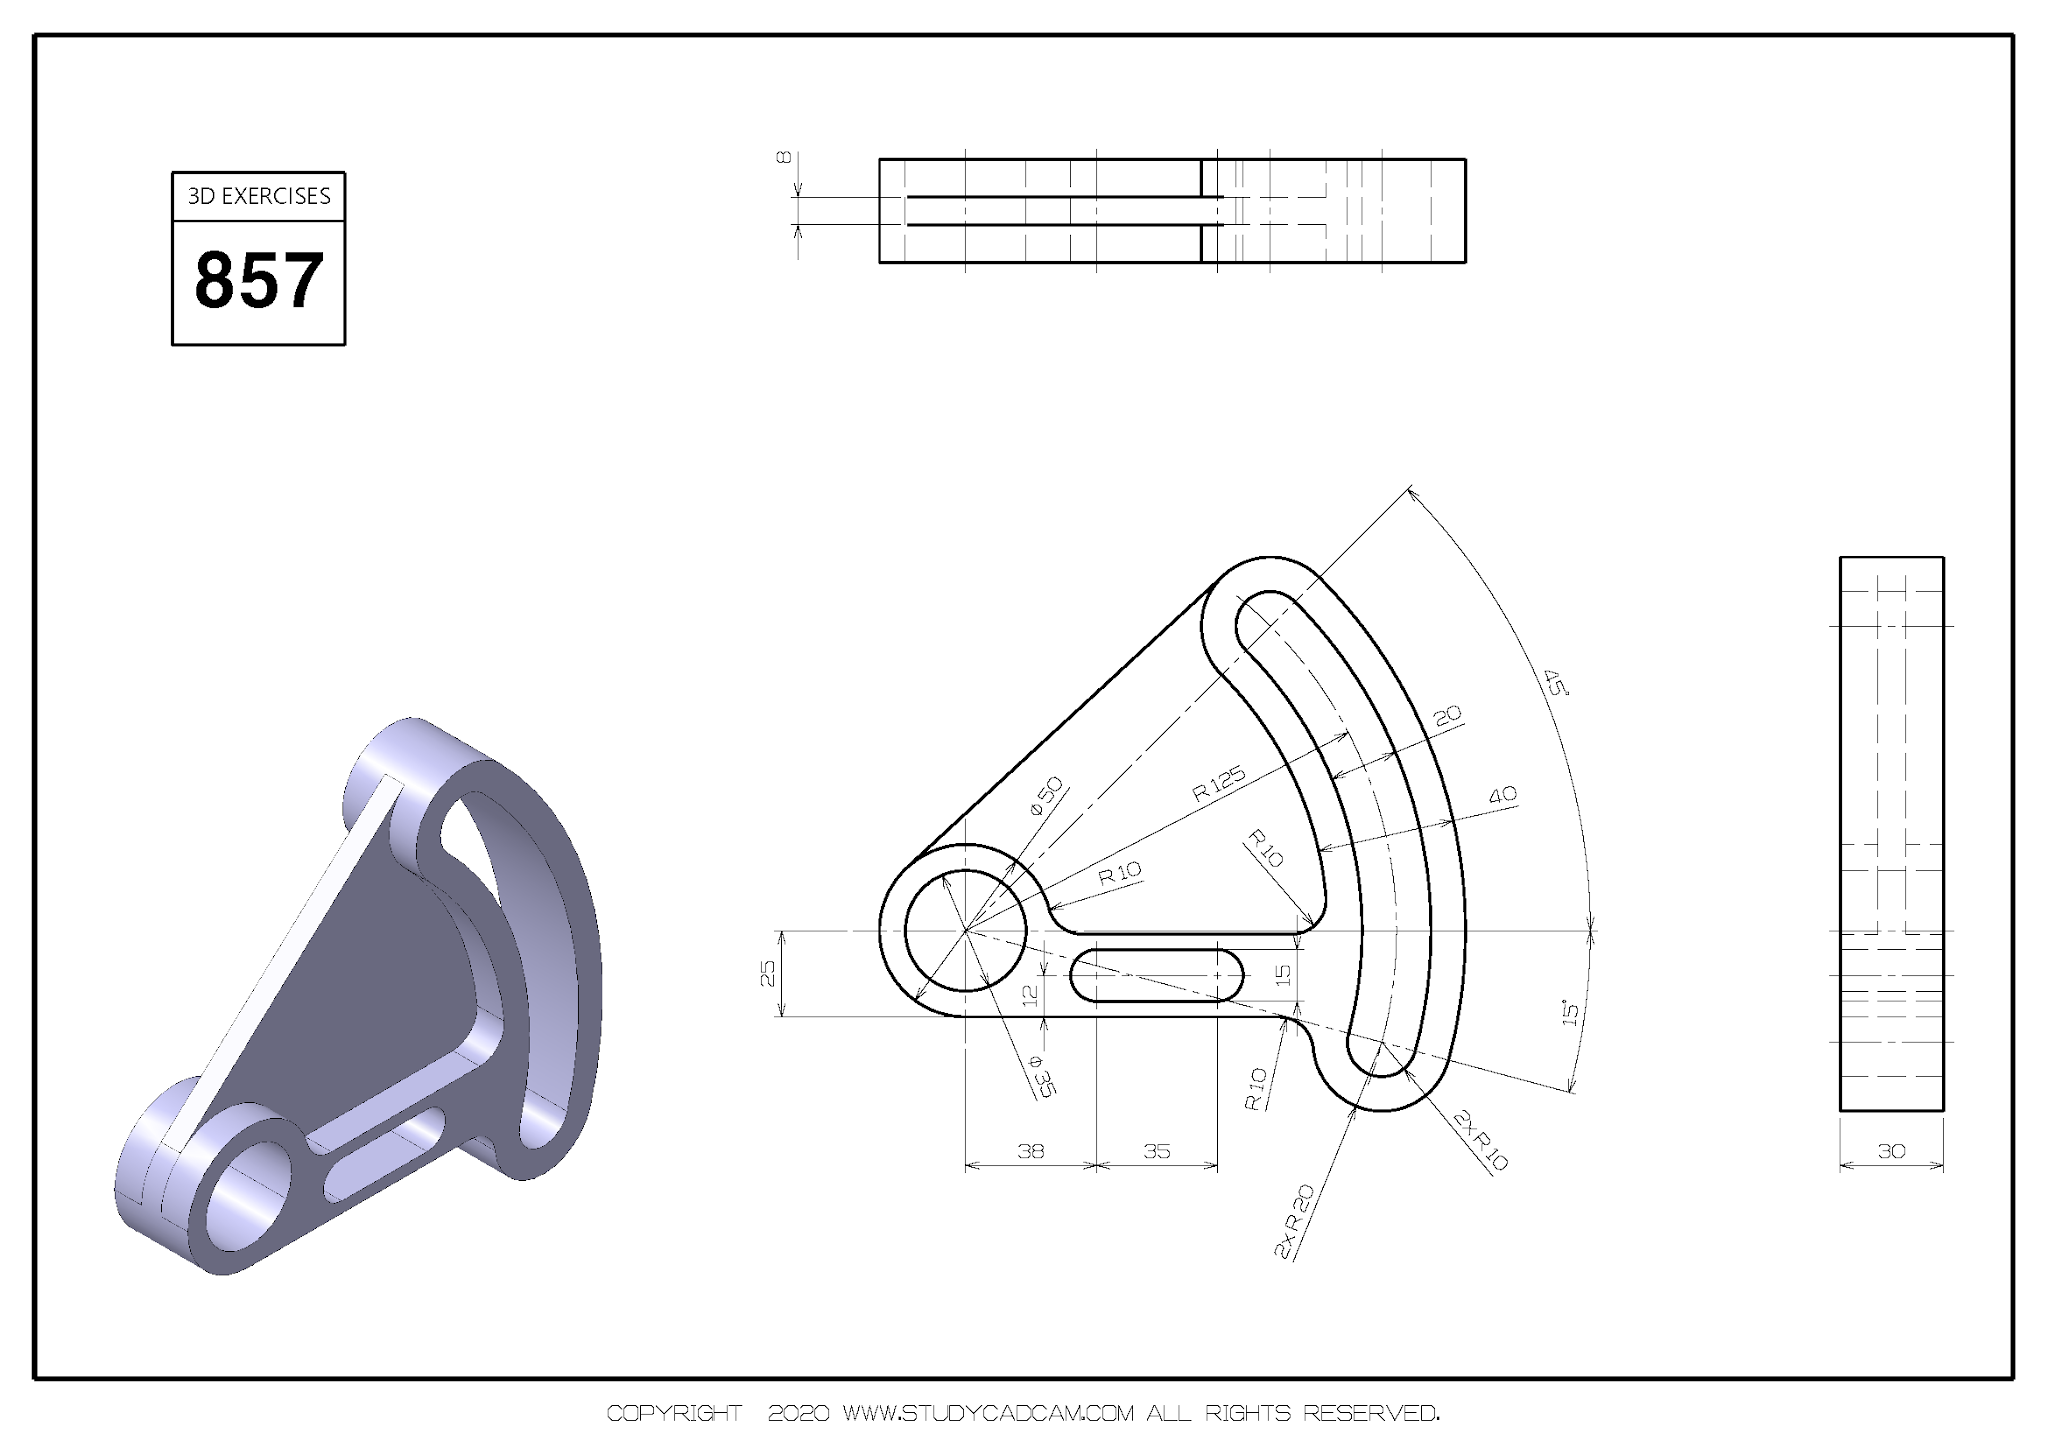 How to Quickly Fully Define Your SOLIDWORKS Sketch